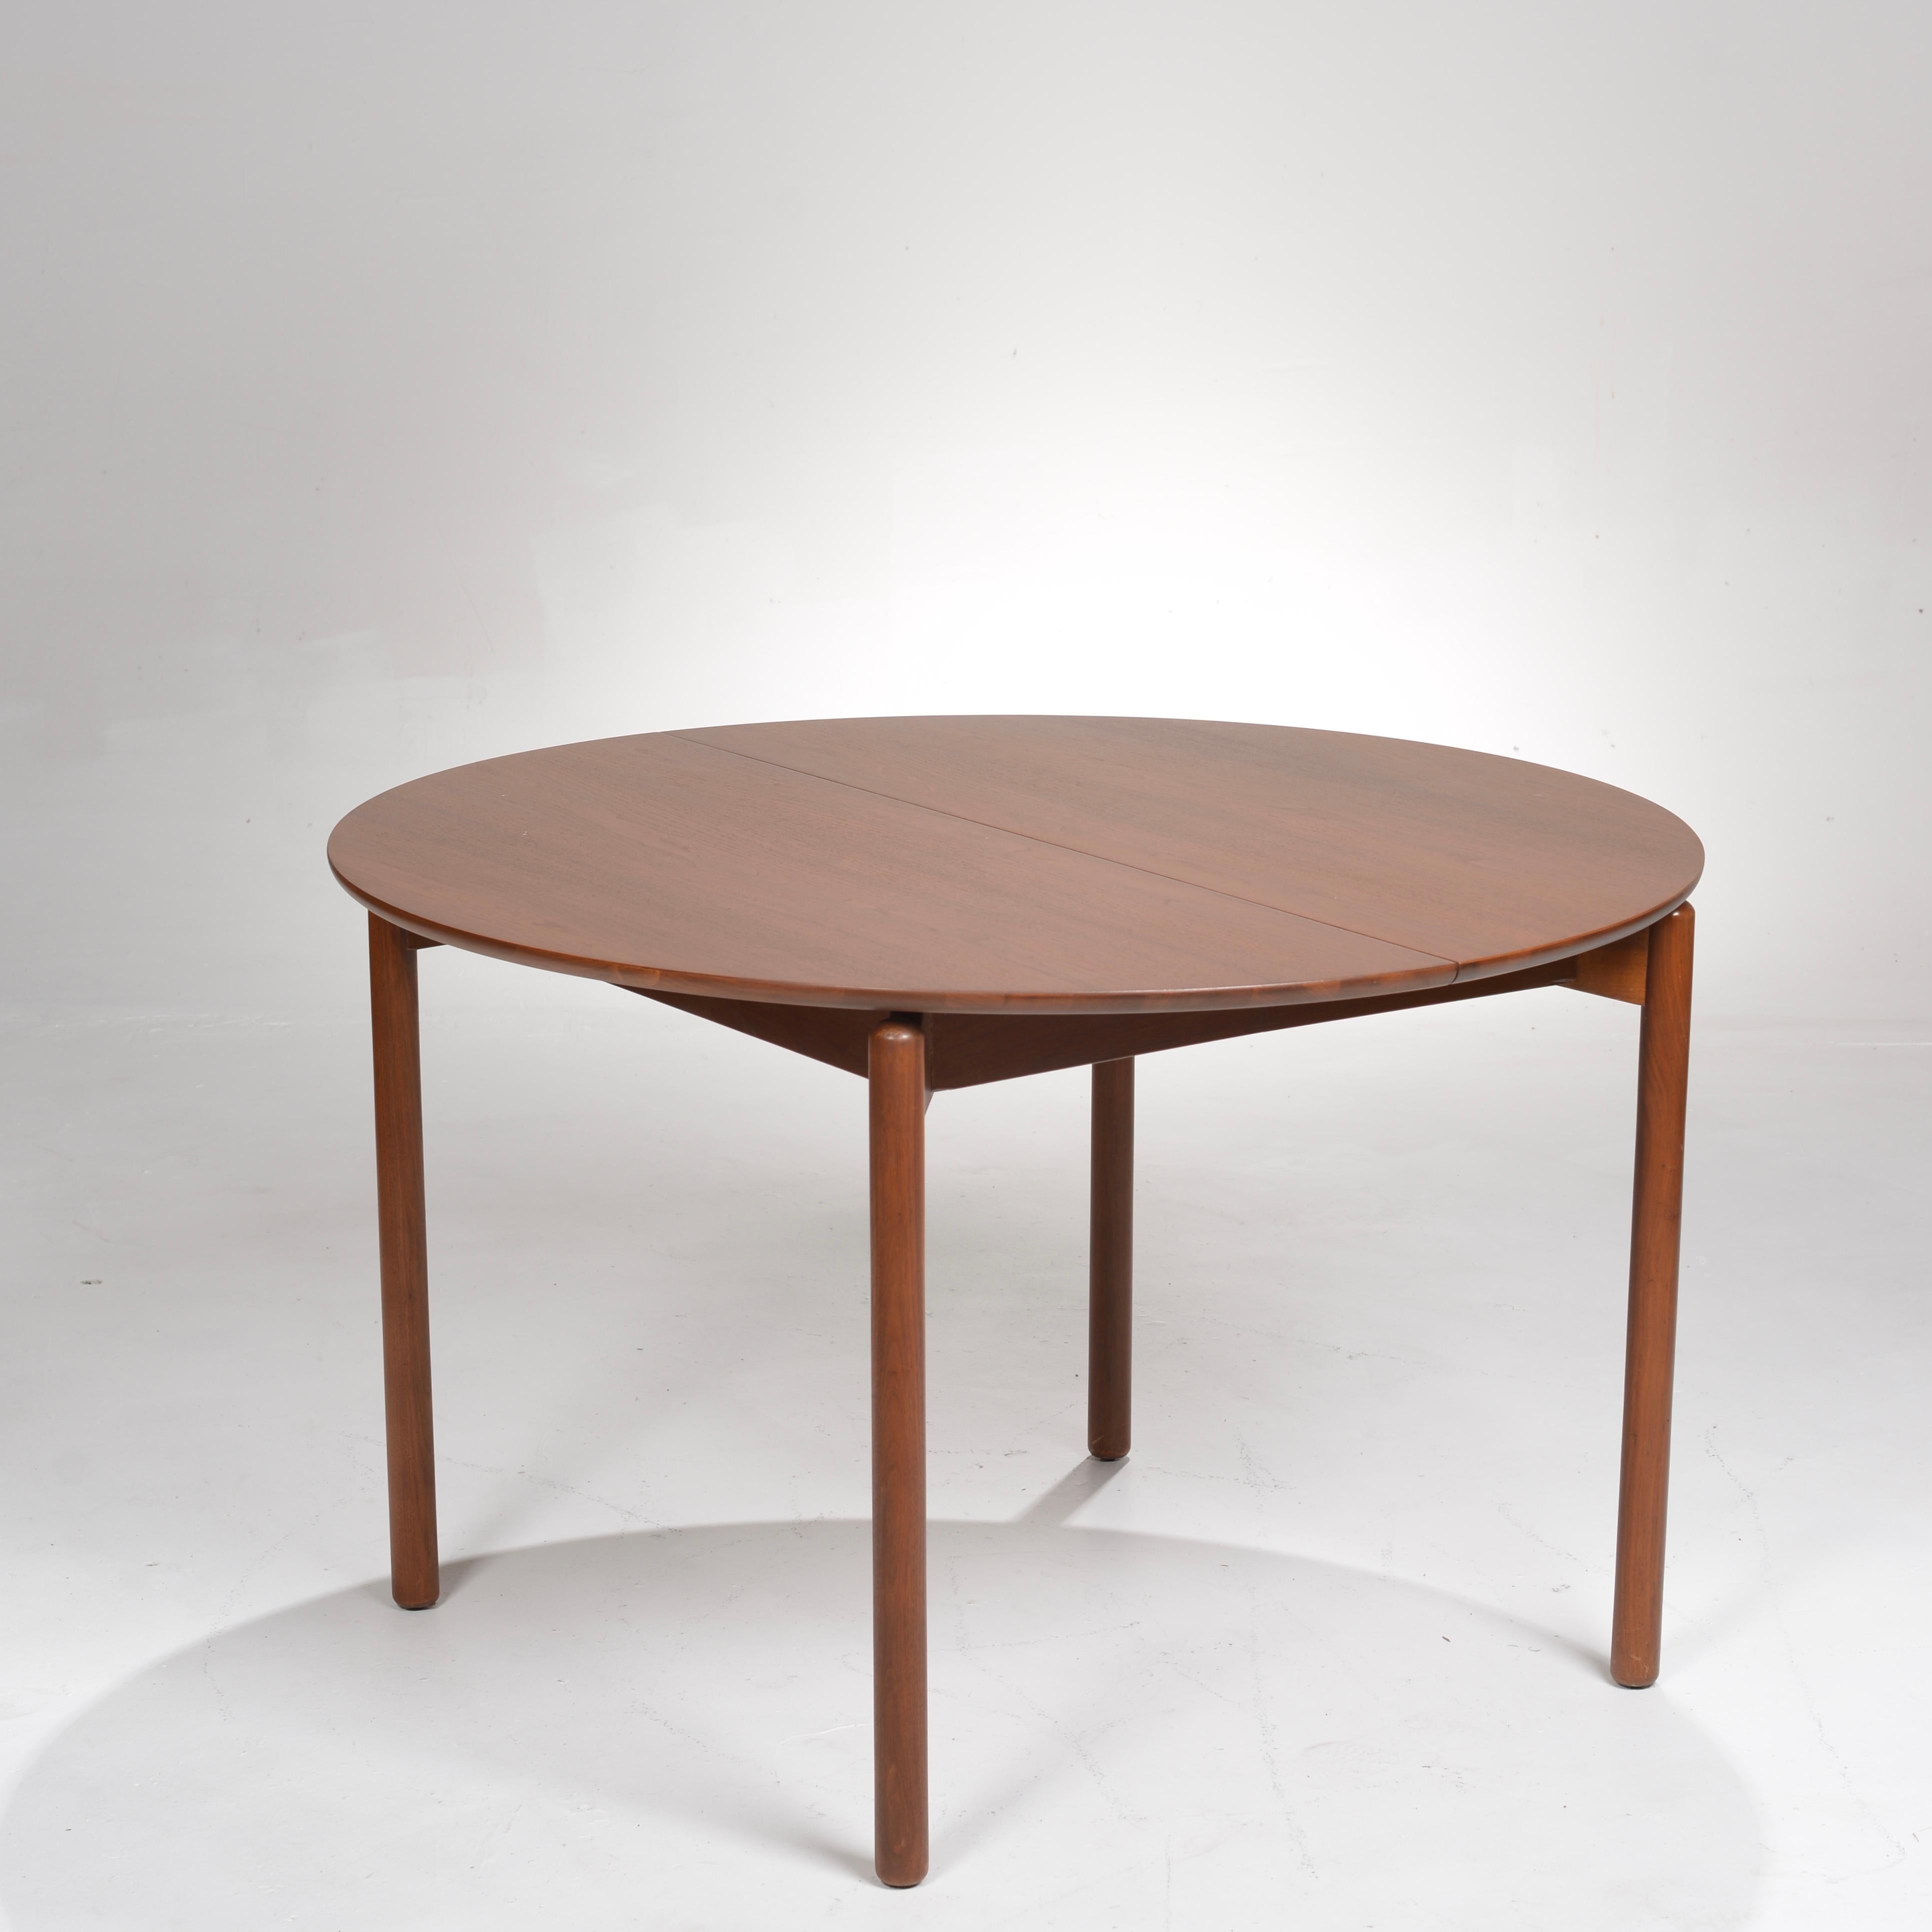 Greta Grossman round walnut dining table by Grossman for Glenn of California. This table has two leaves. This item is located at our Downtown Los Angeles showroom.
 